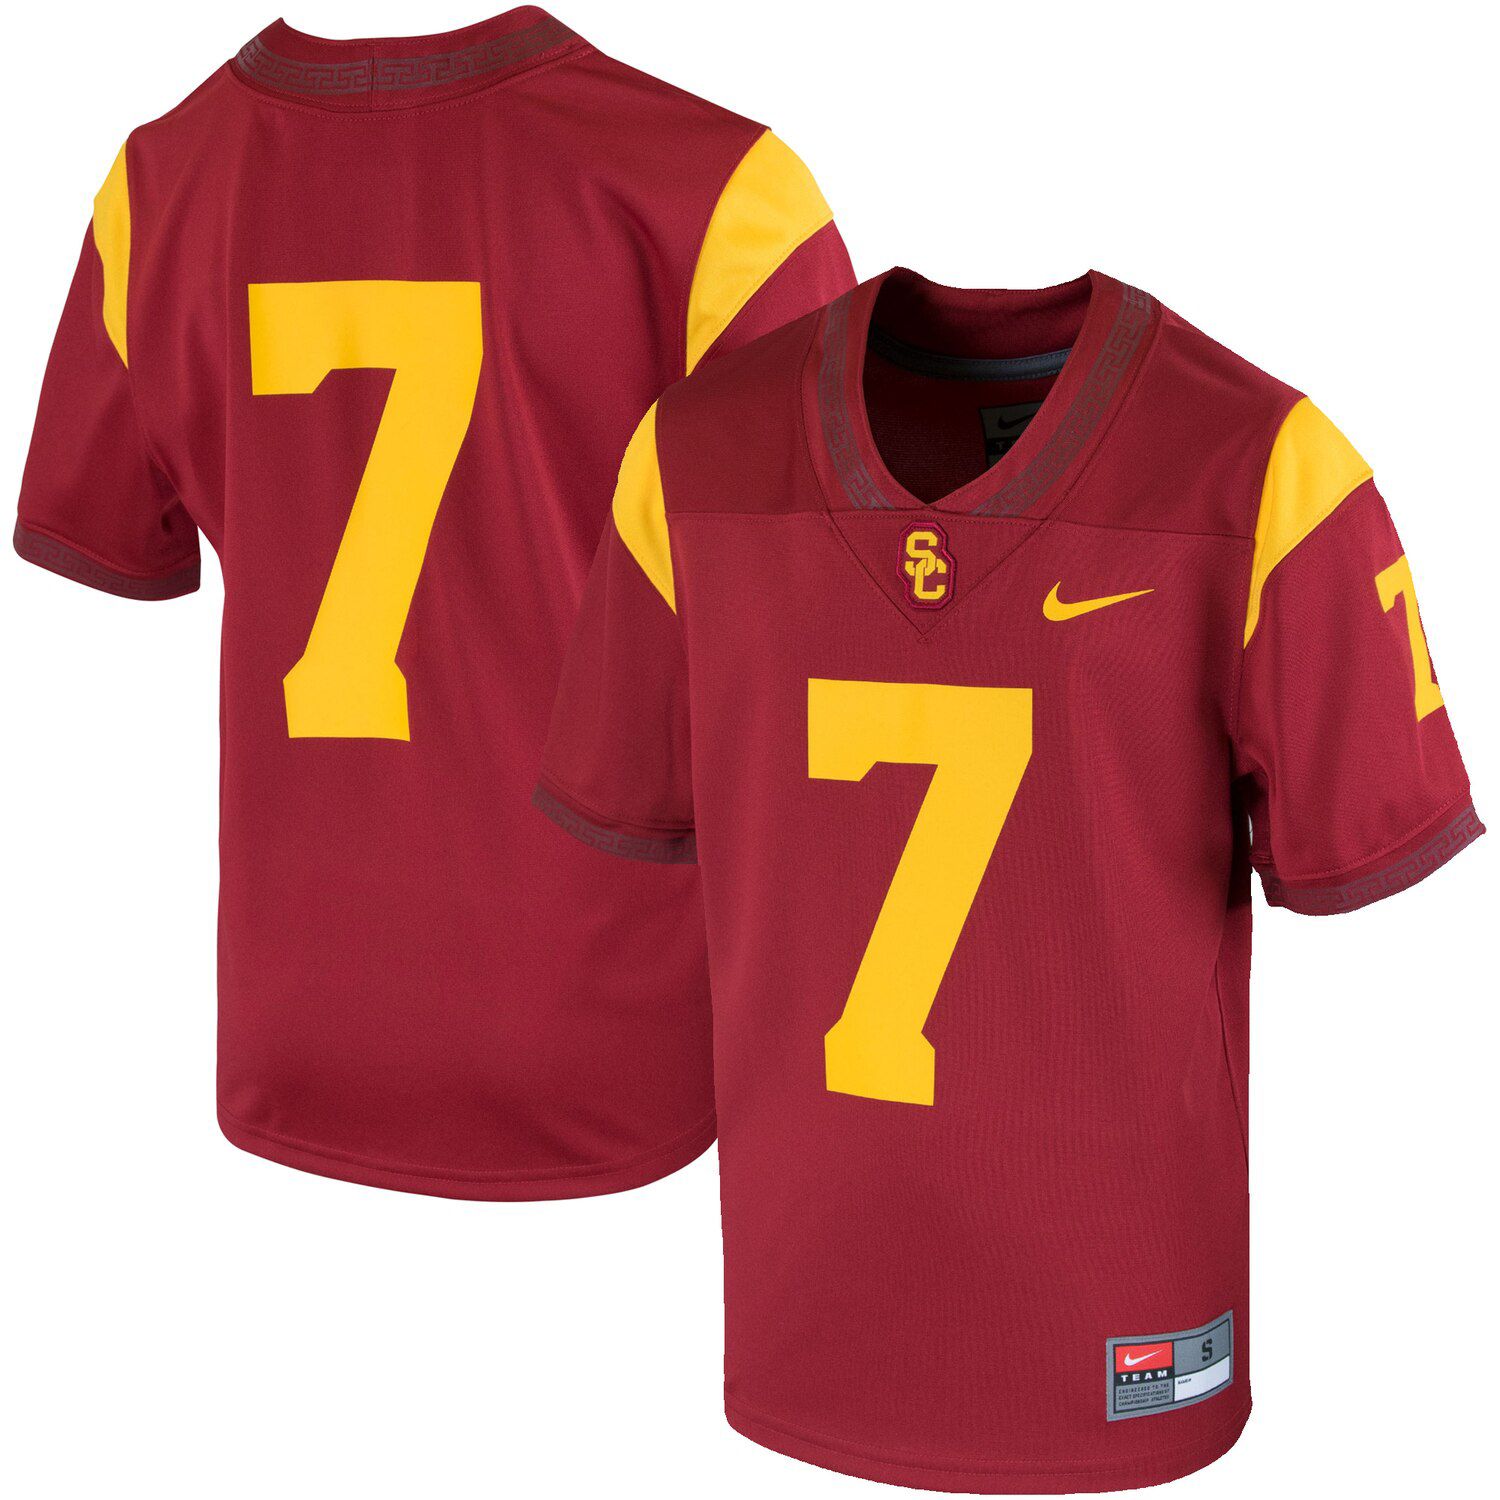 usc number 7 jersey